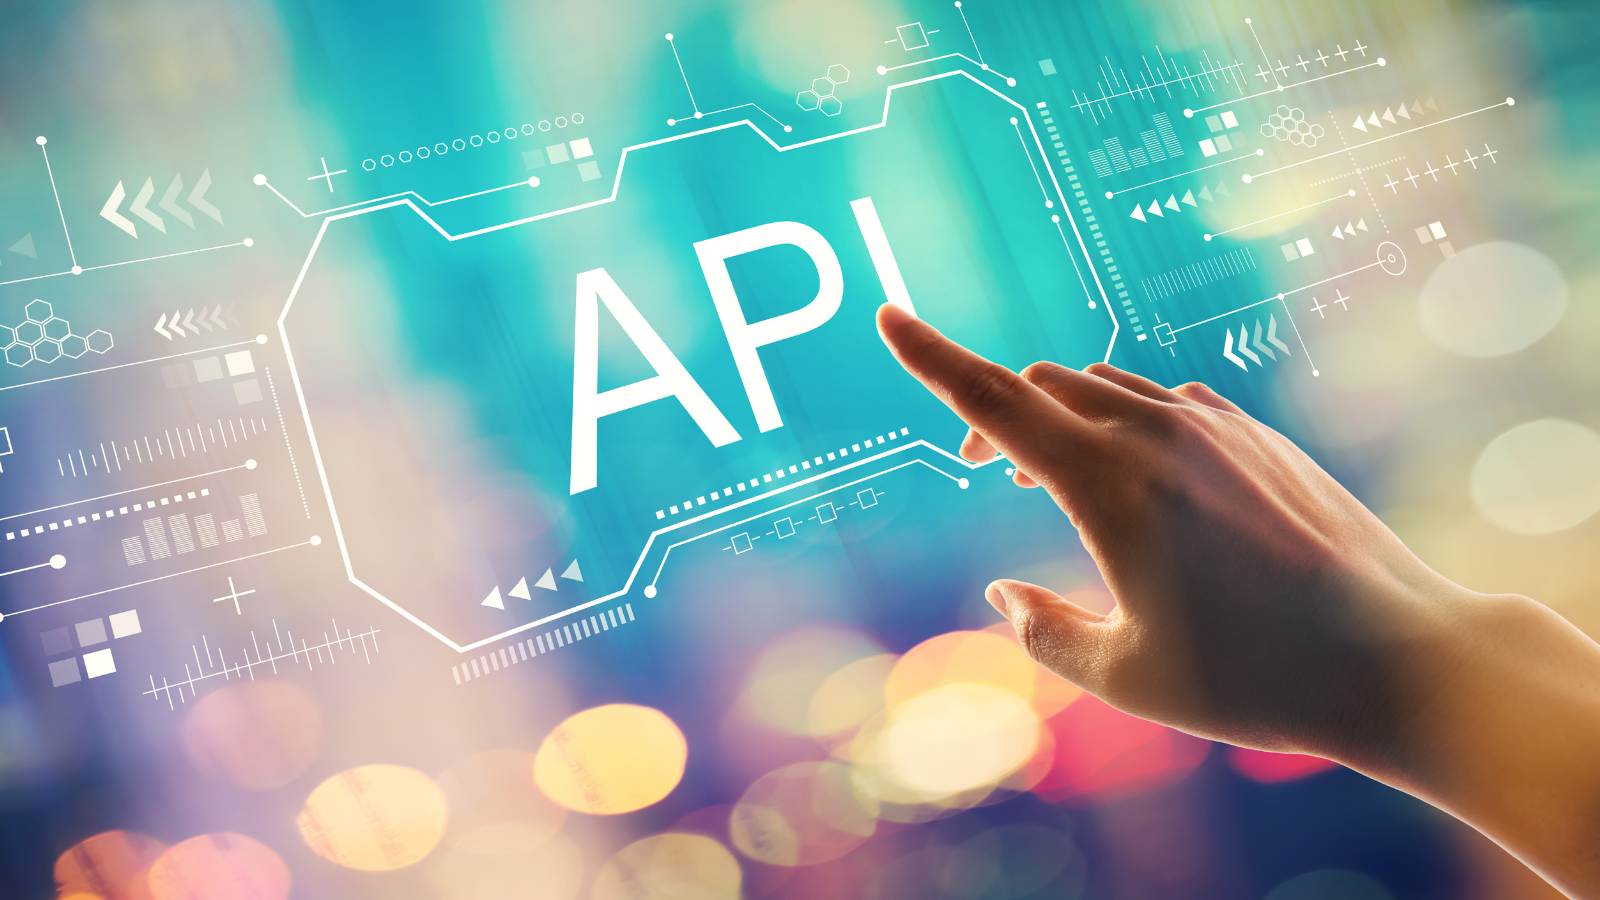 How are SMS APIs good for business?